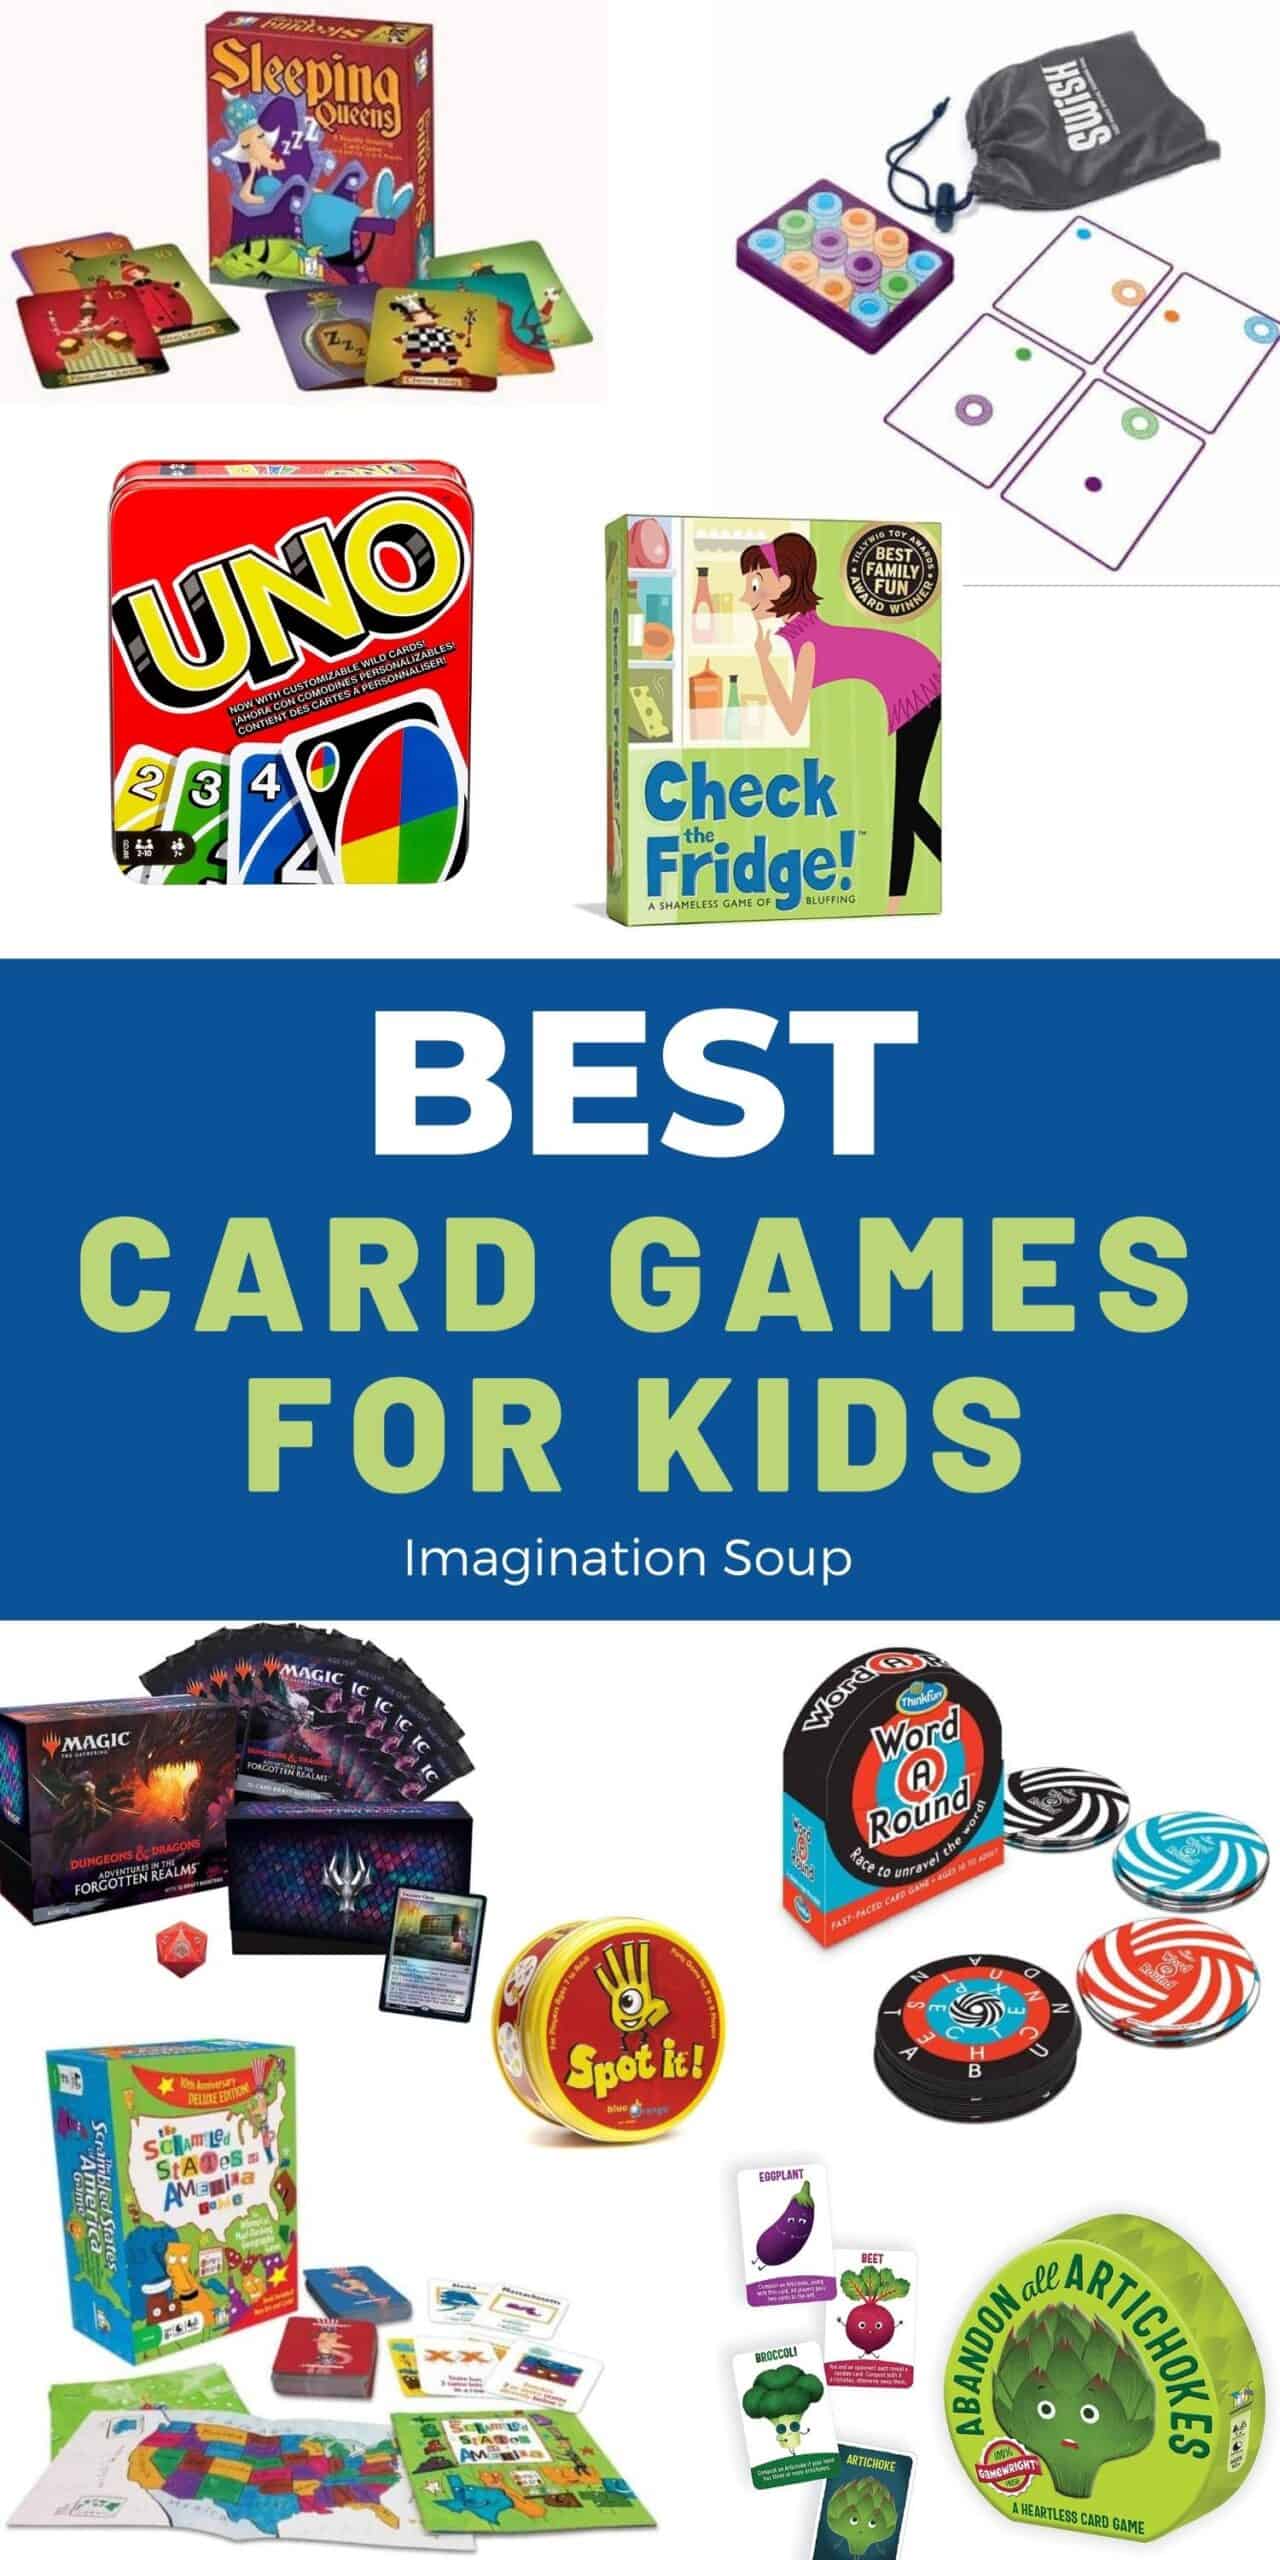 BEST card games for kids